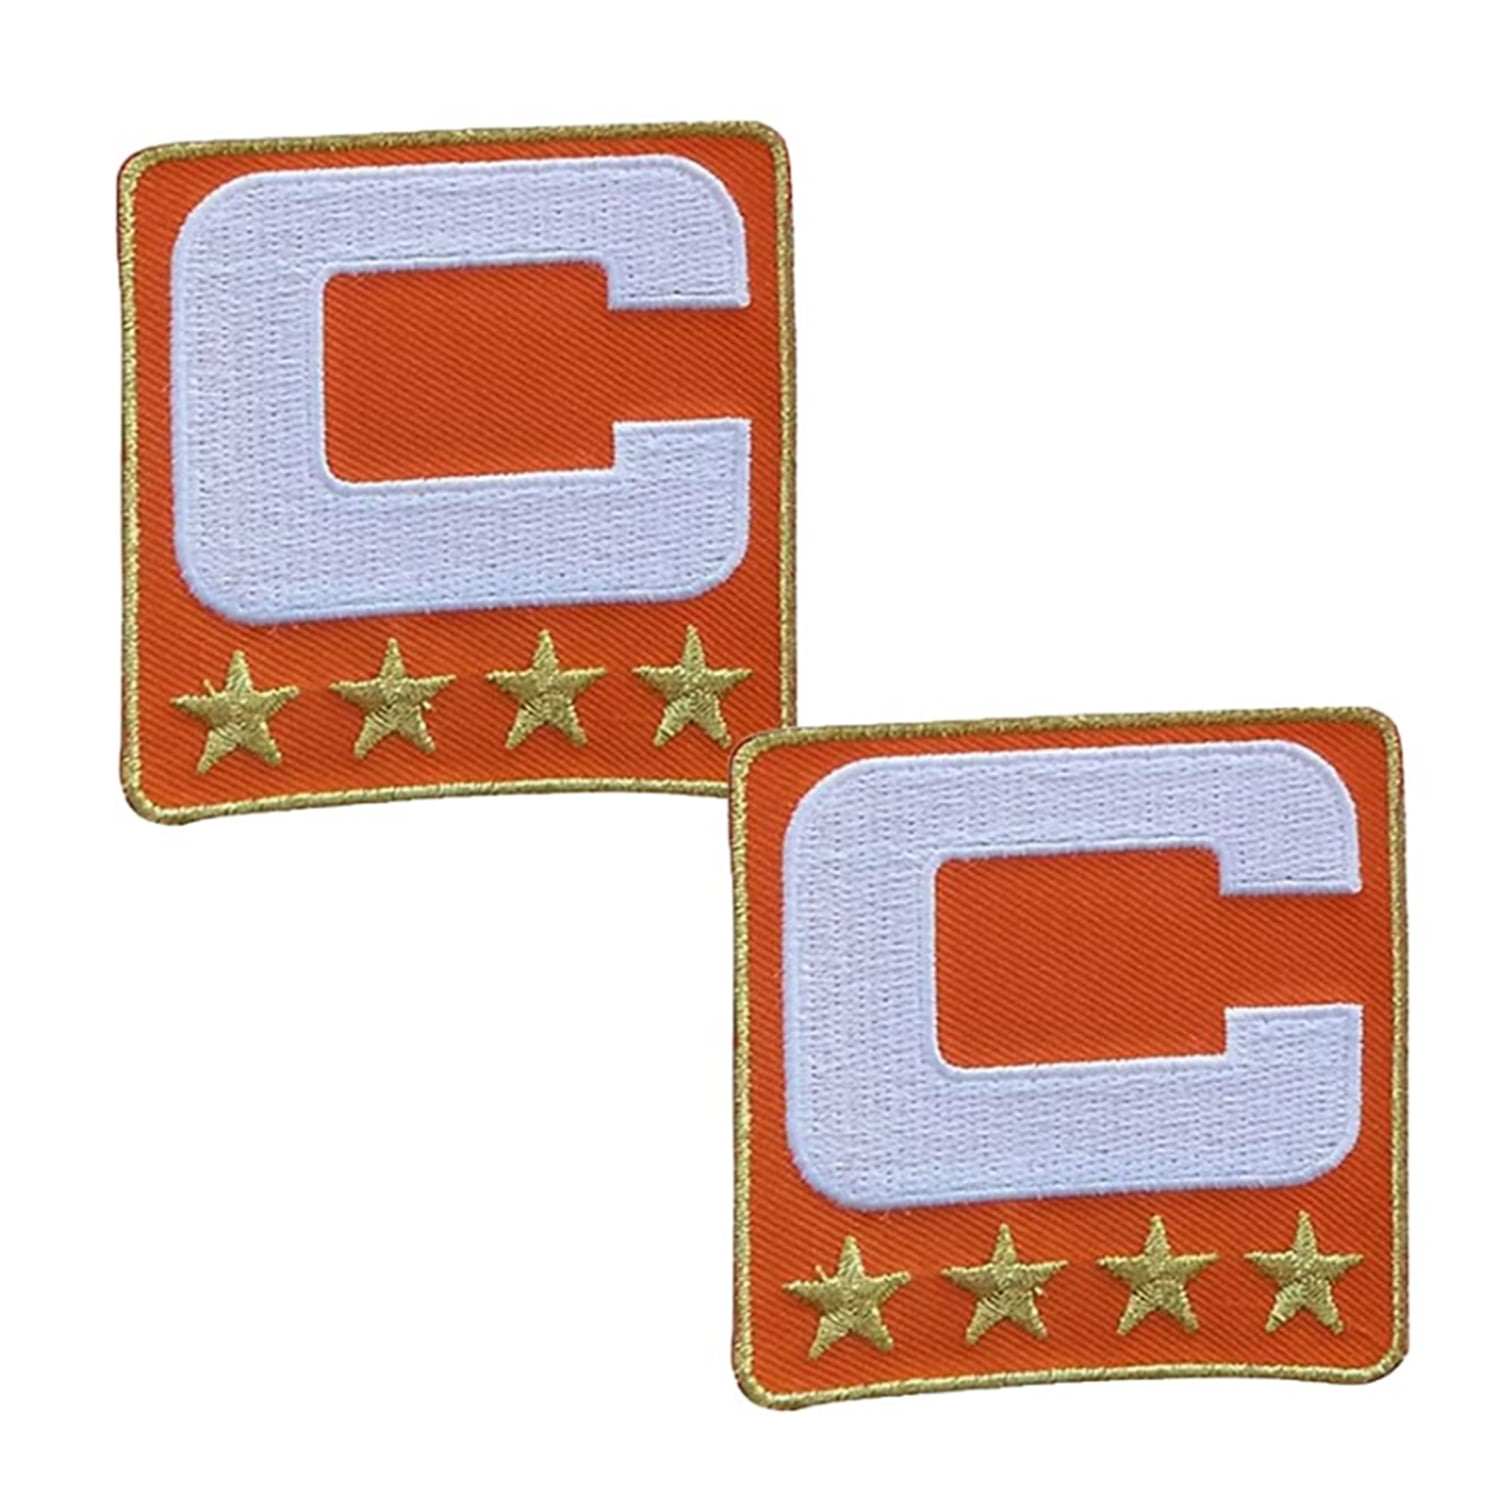 Black Captain C Patch 4 Stars Sewing On for Jersey Football